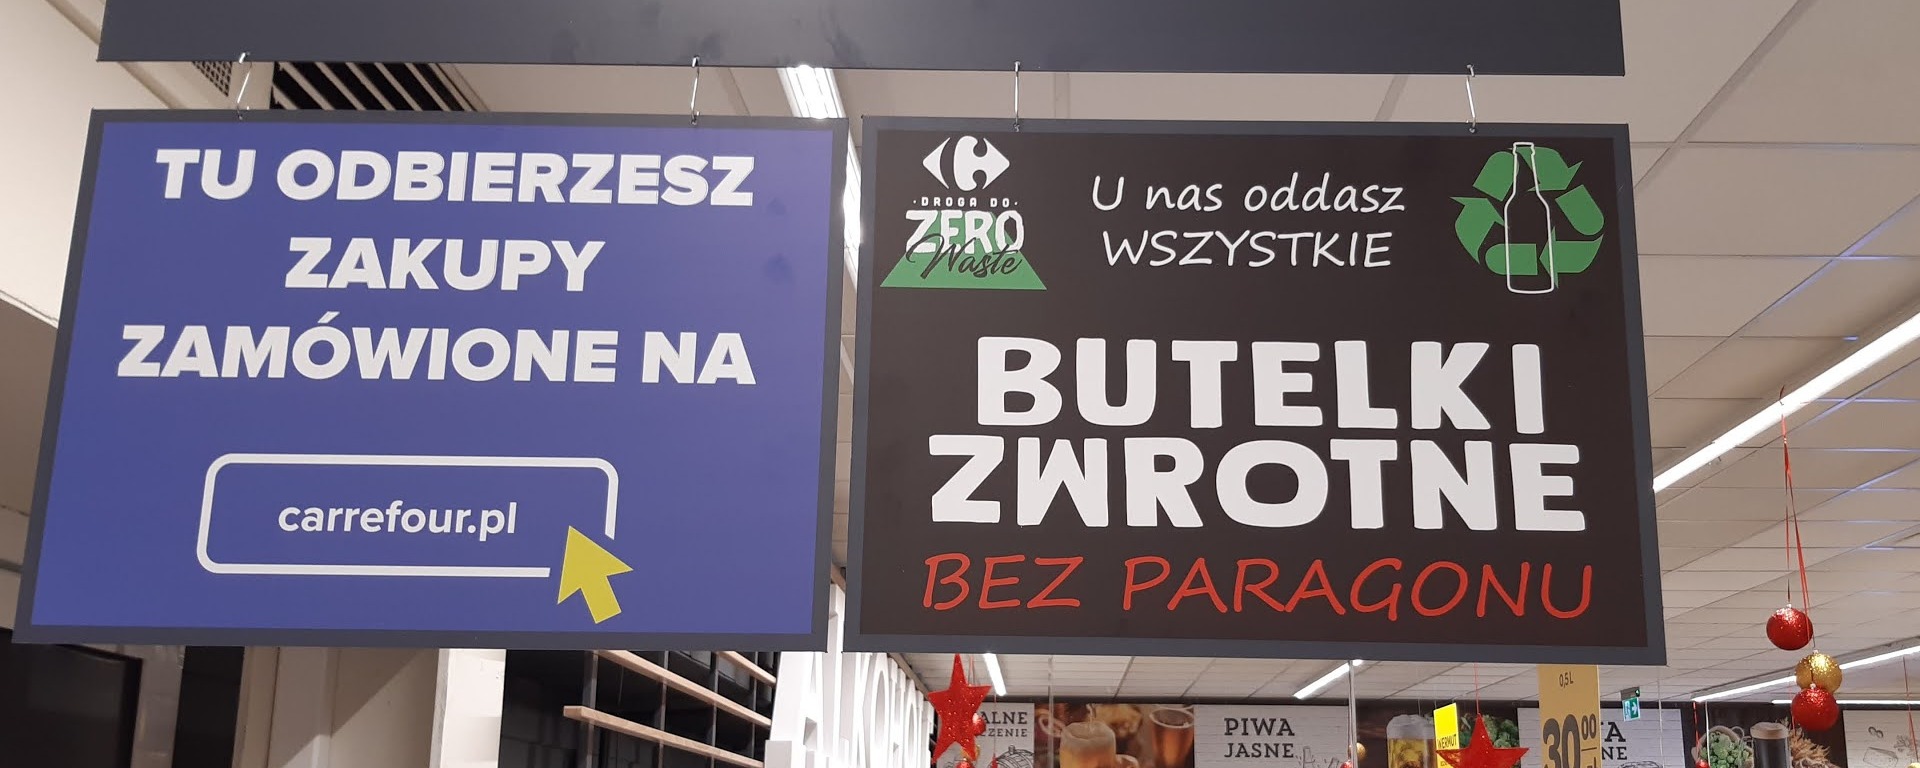 You can return empty bottles without a receipt at all Carrefour hyper- and supermarkets in Poland